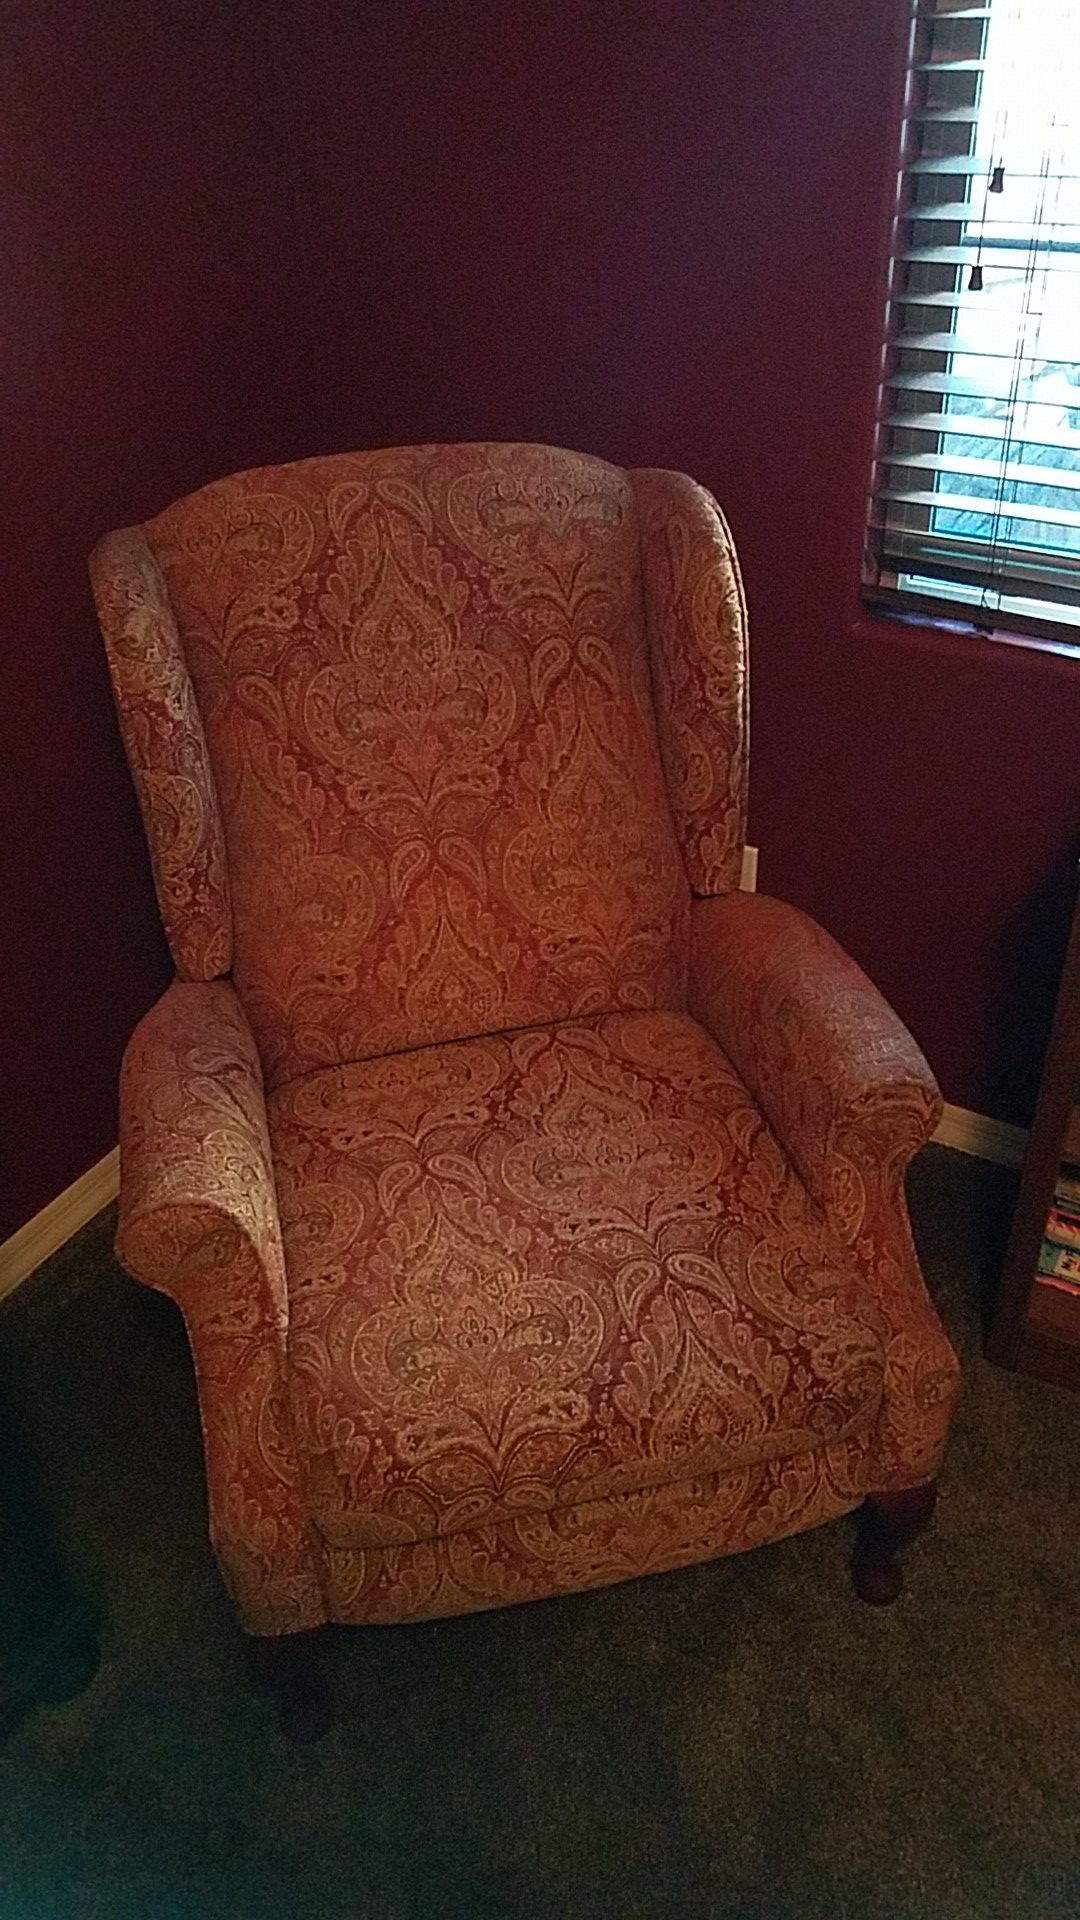 2 reclining wing back chairs